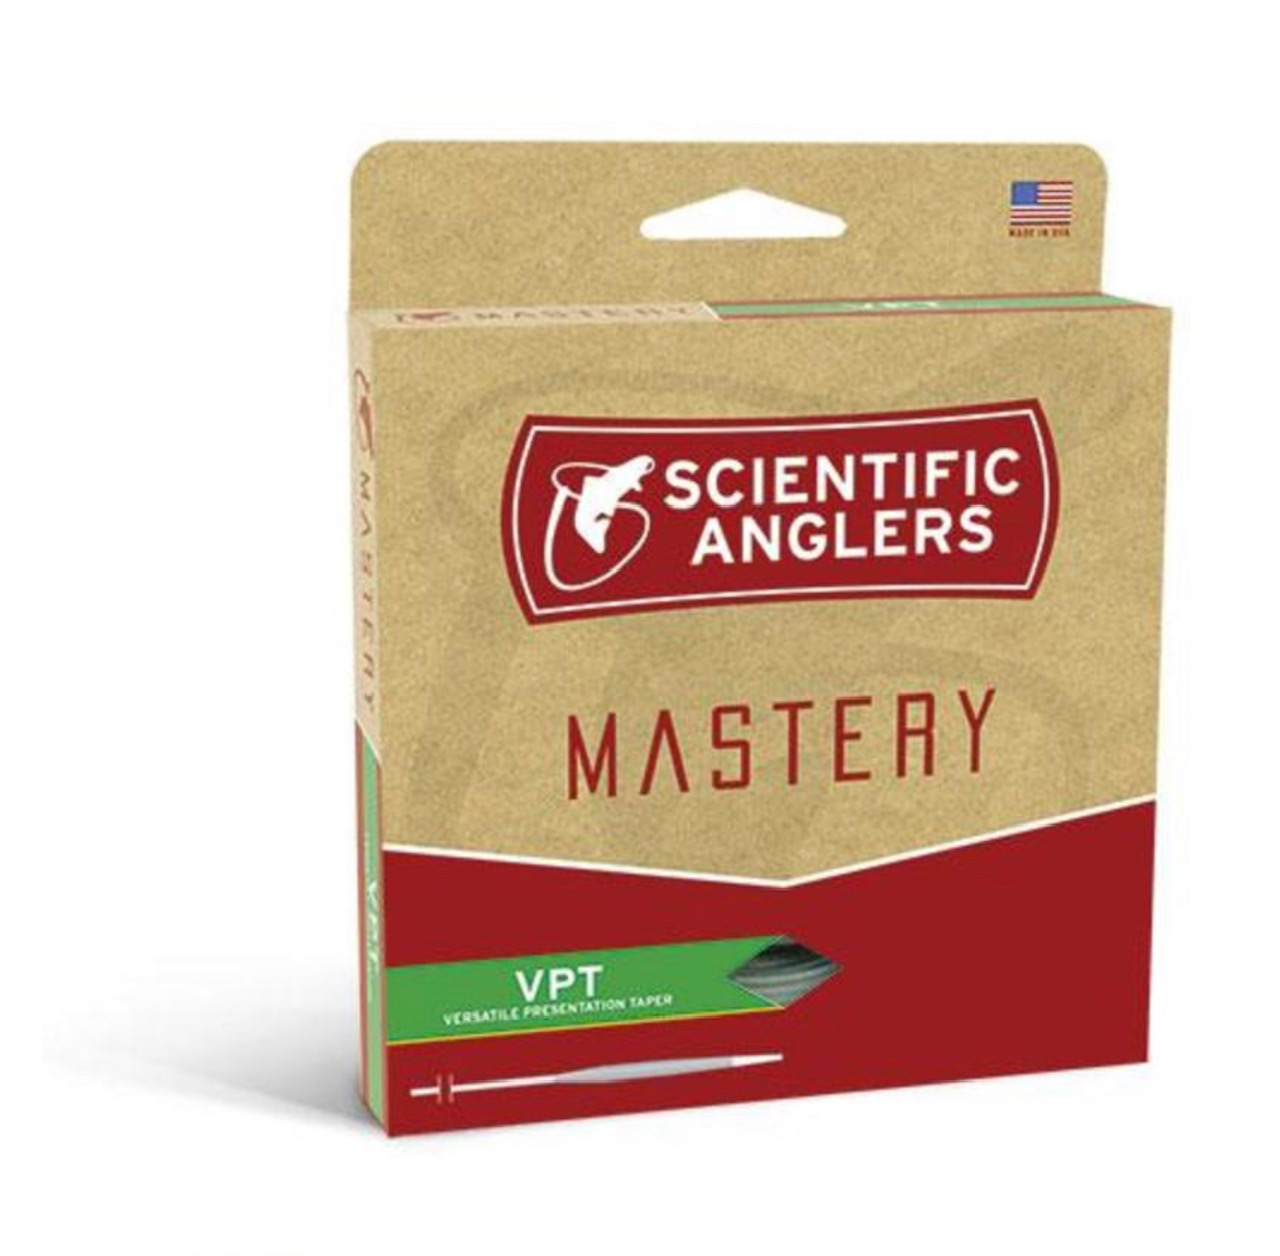 Scientific Anglers Mastery VPT - WF6F